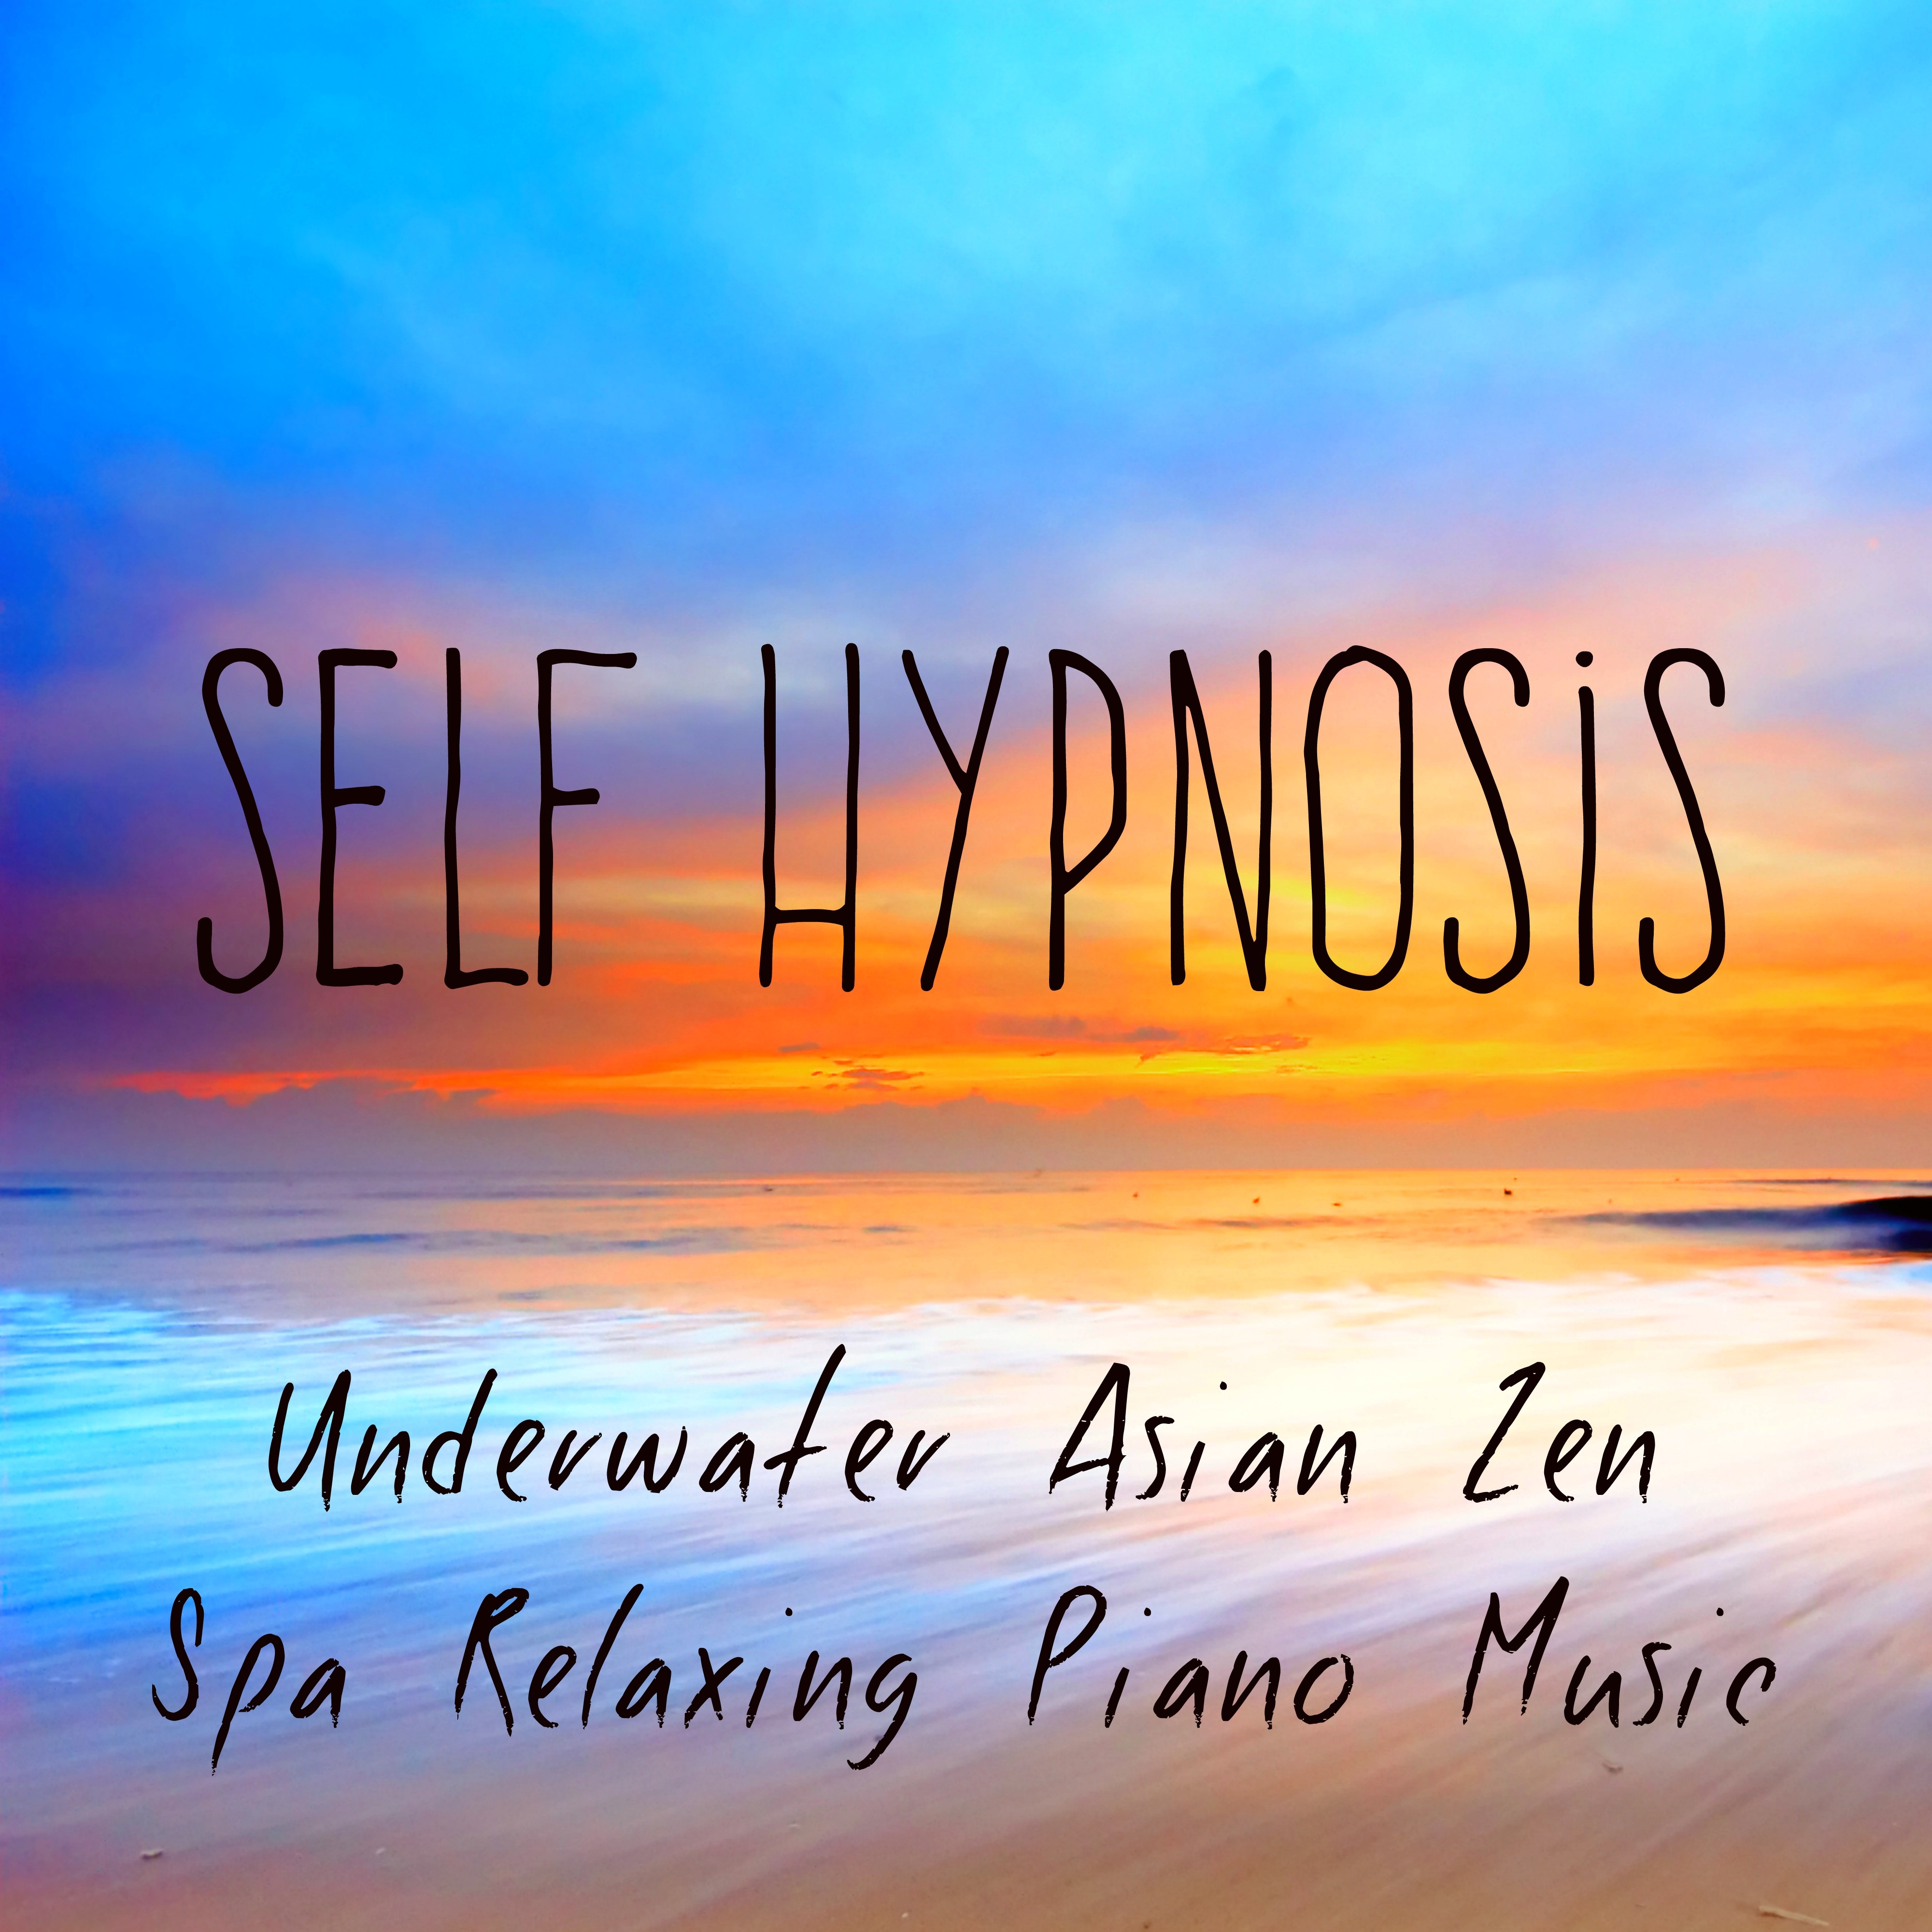 Self Hypnosis - Underwater Asian Zen Spa Relaxing Piano Music for Spiritual Healing Pure Massage with Meditative Instrumental Sounds